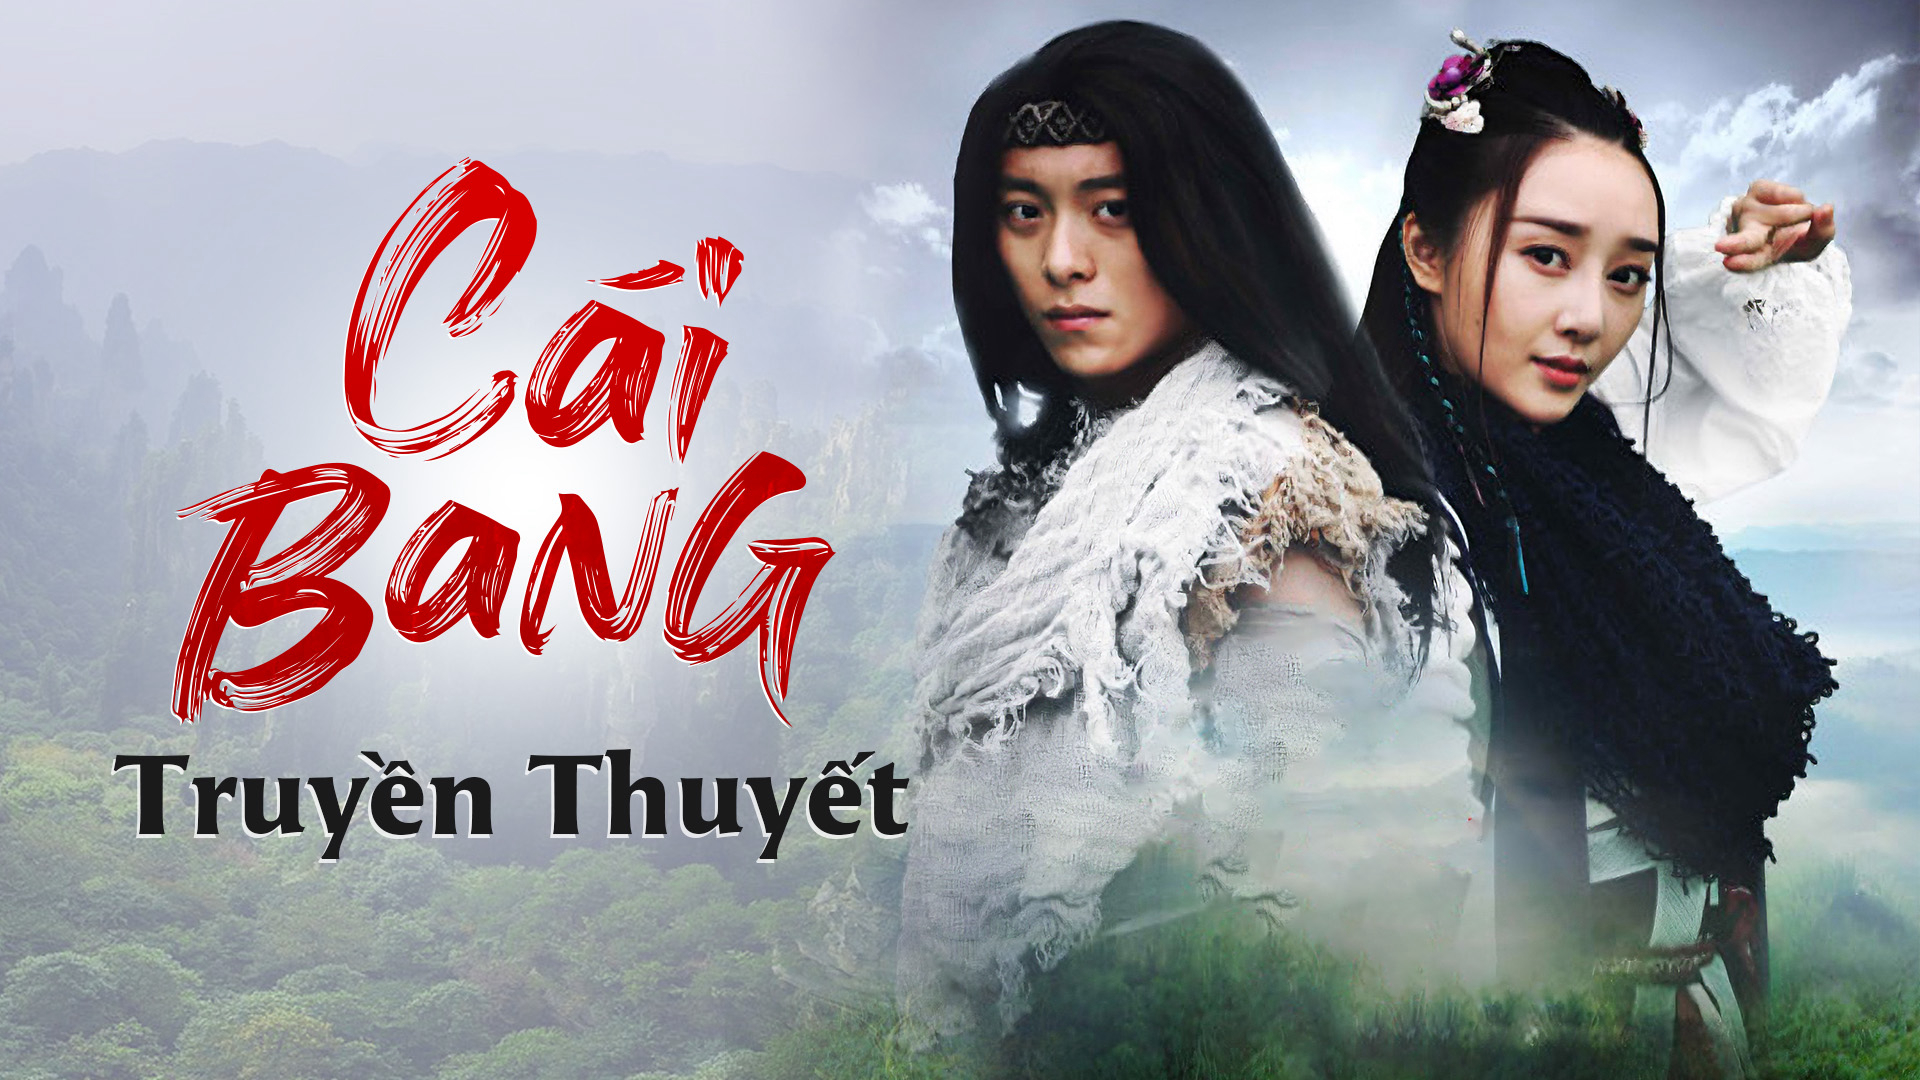 Cái Bang Truyền Thuyết Other People’s Lives